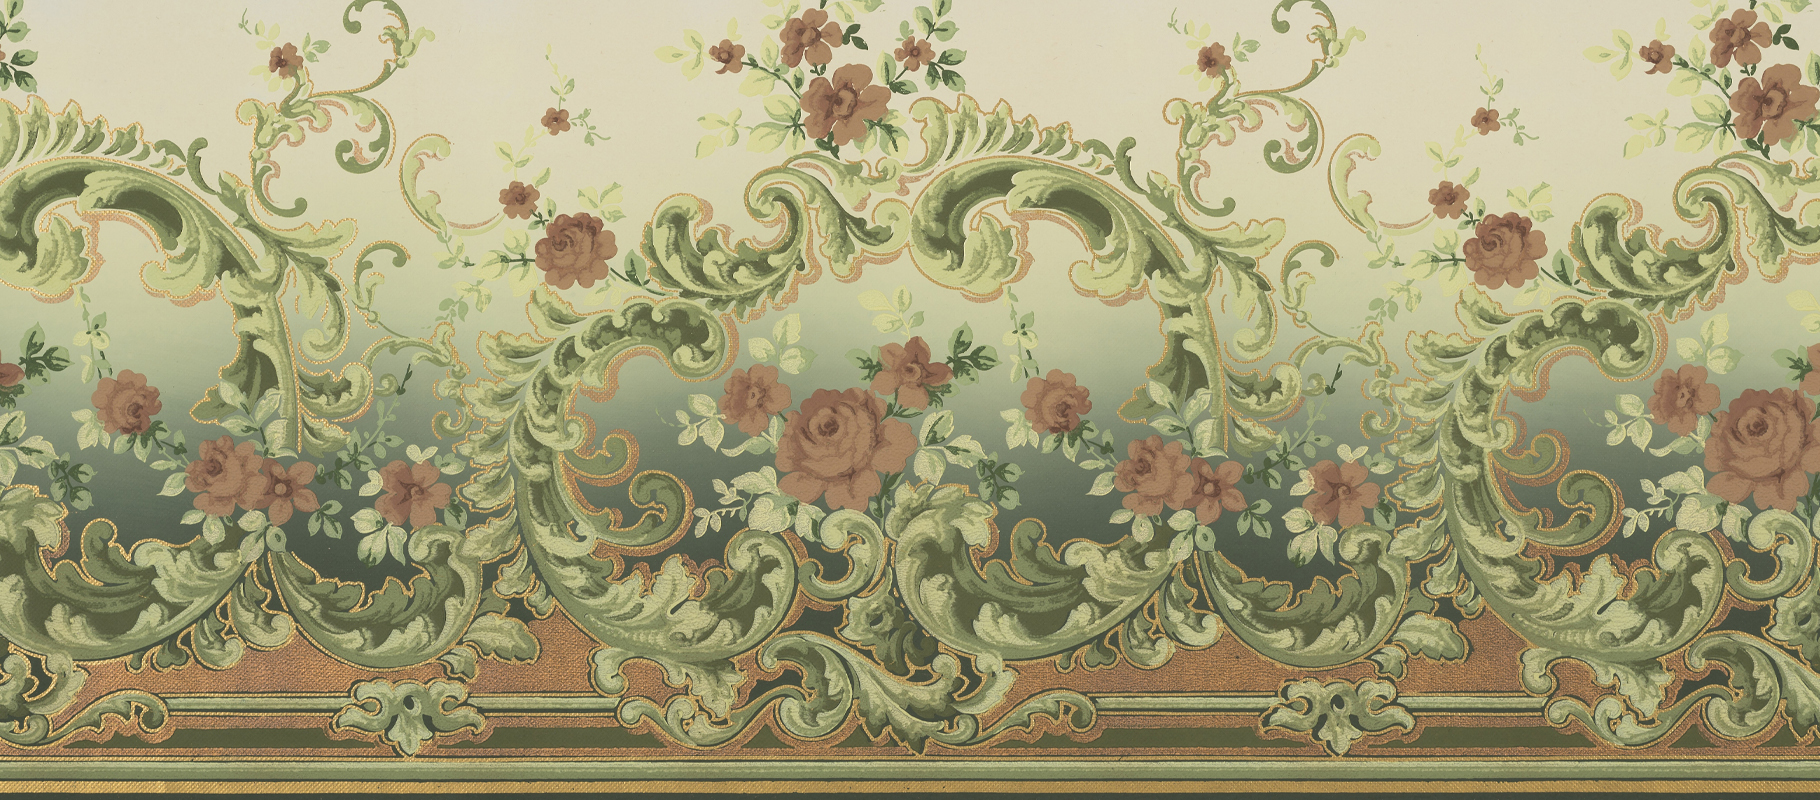 1850s Fabric, Wallpaper and Home Decor | Spoonflower